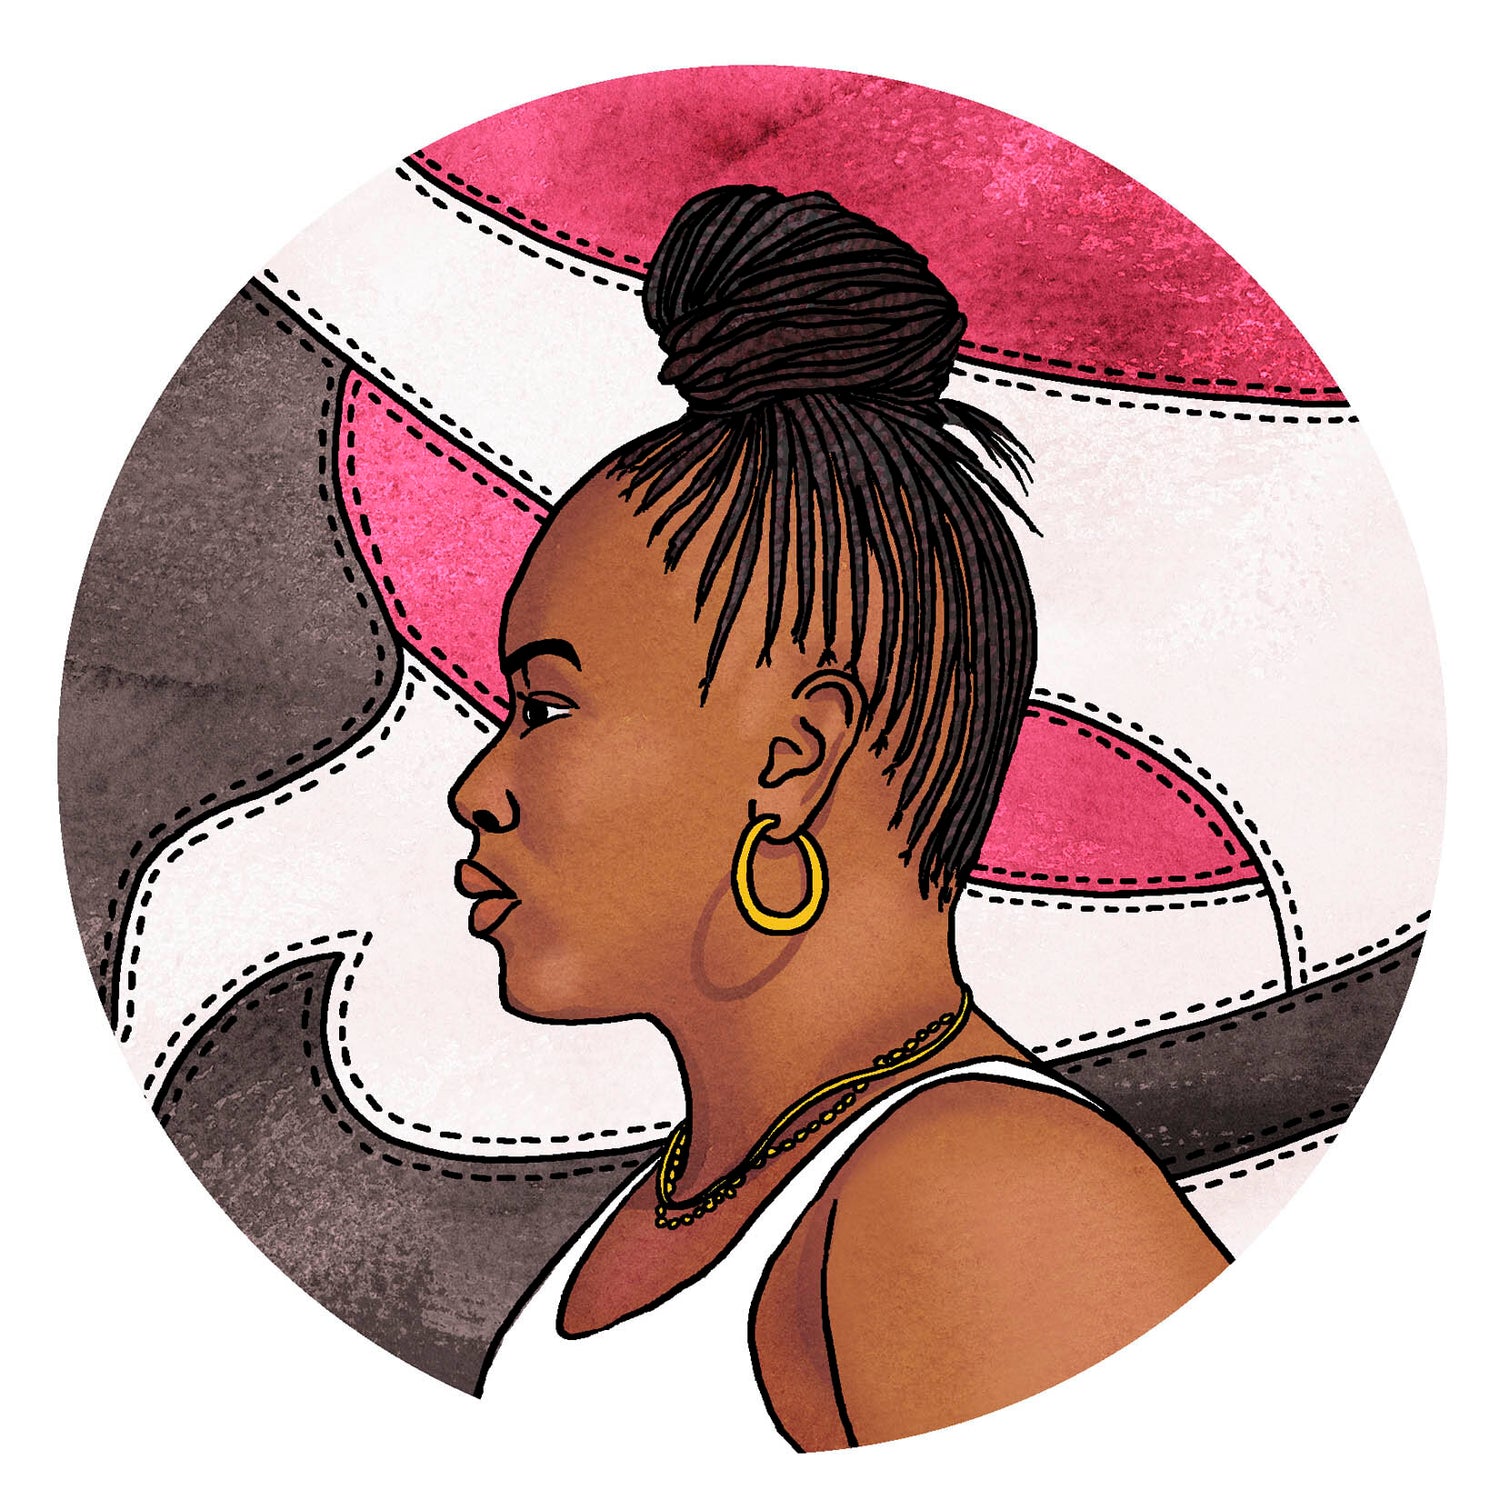 Circular illustrated Profile portrait of writer Darian Harvin wearing braids in a bun with an abstract red, white, and black pattern in the background inspired by Nike sneaker details